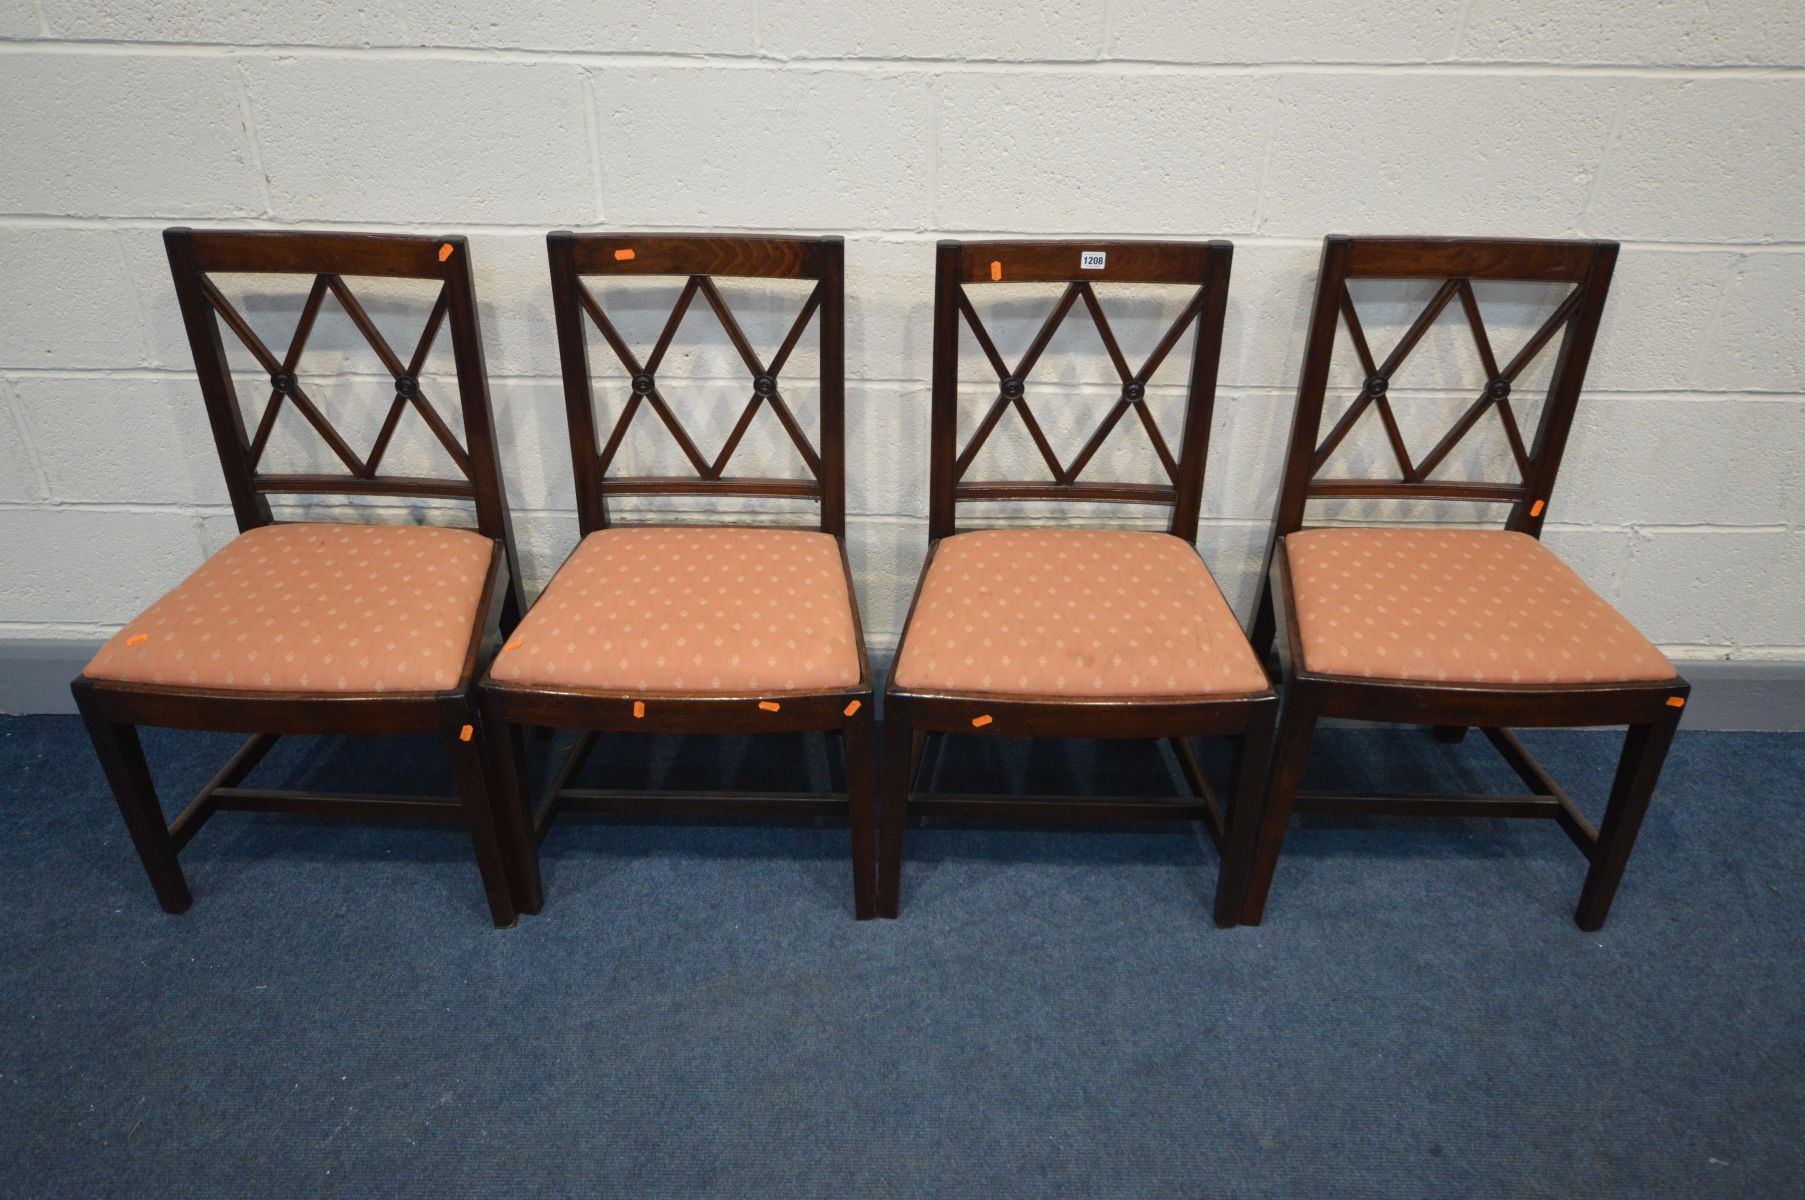 A SET OF FOUR GEORGIAN LATTICE BACK CHAIRS, with pink upholstered inserts